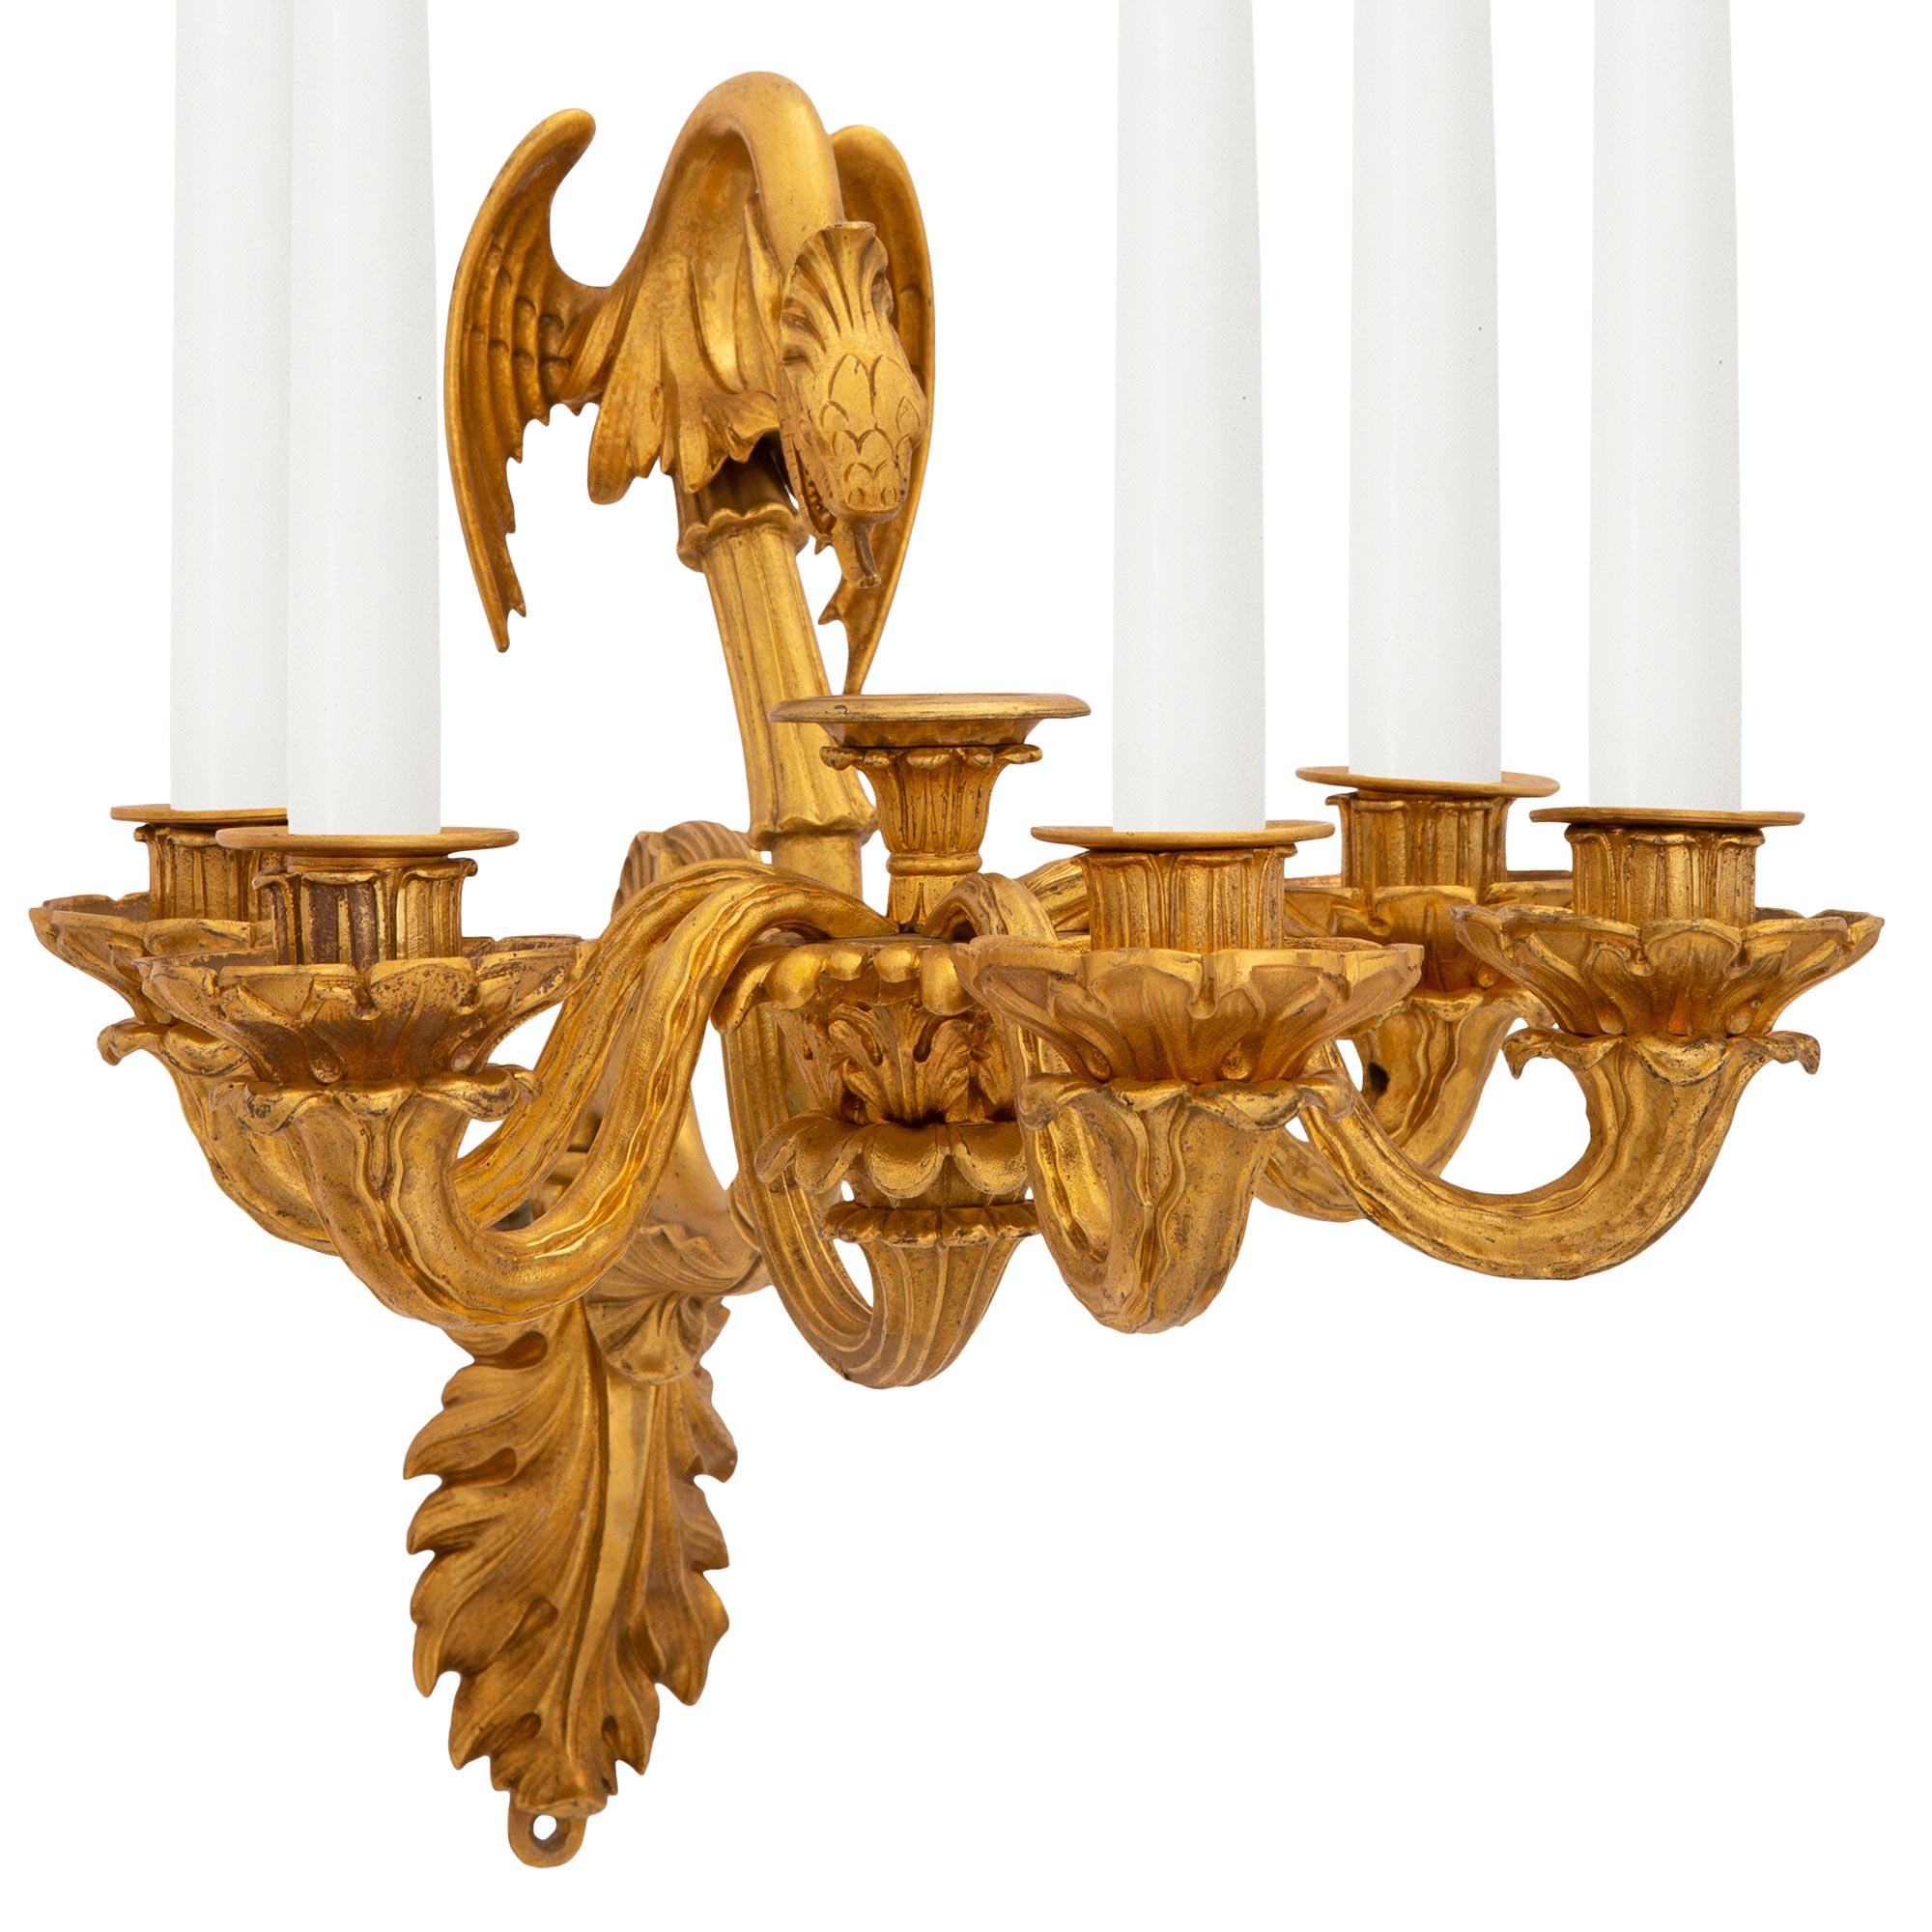 A striking and high quality pair of French 19th century neo-classical st. ormolu sconces. Each five arm sconce is centered by an exceptional foliate backplate from where the elegant scrolled support branches out. The beautiful scrolled arms display